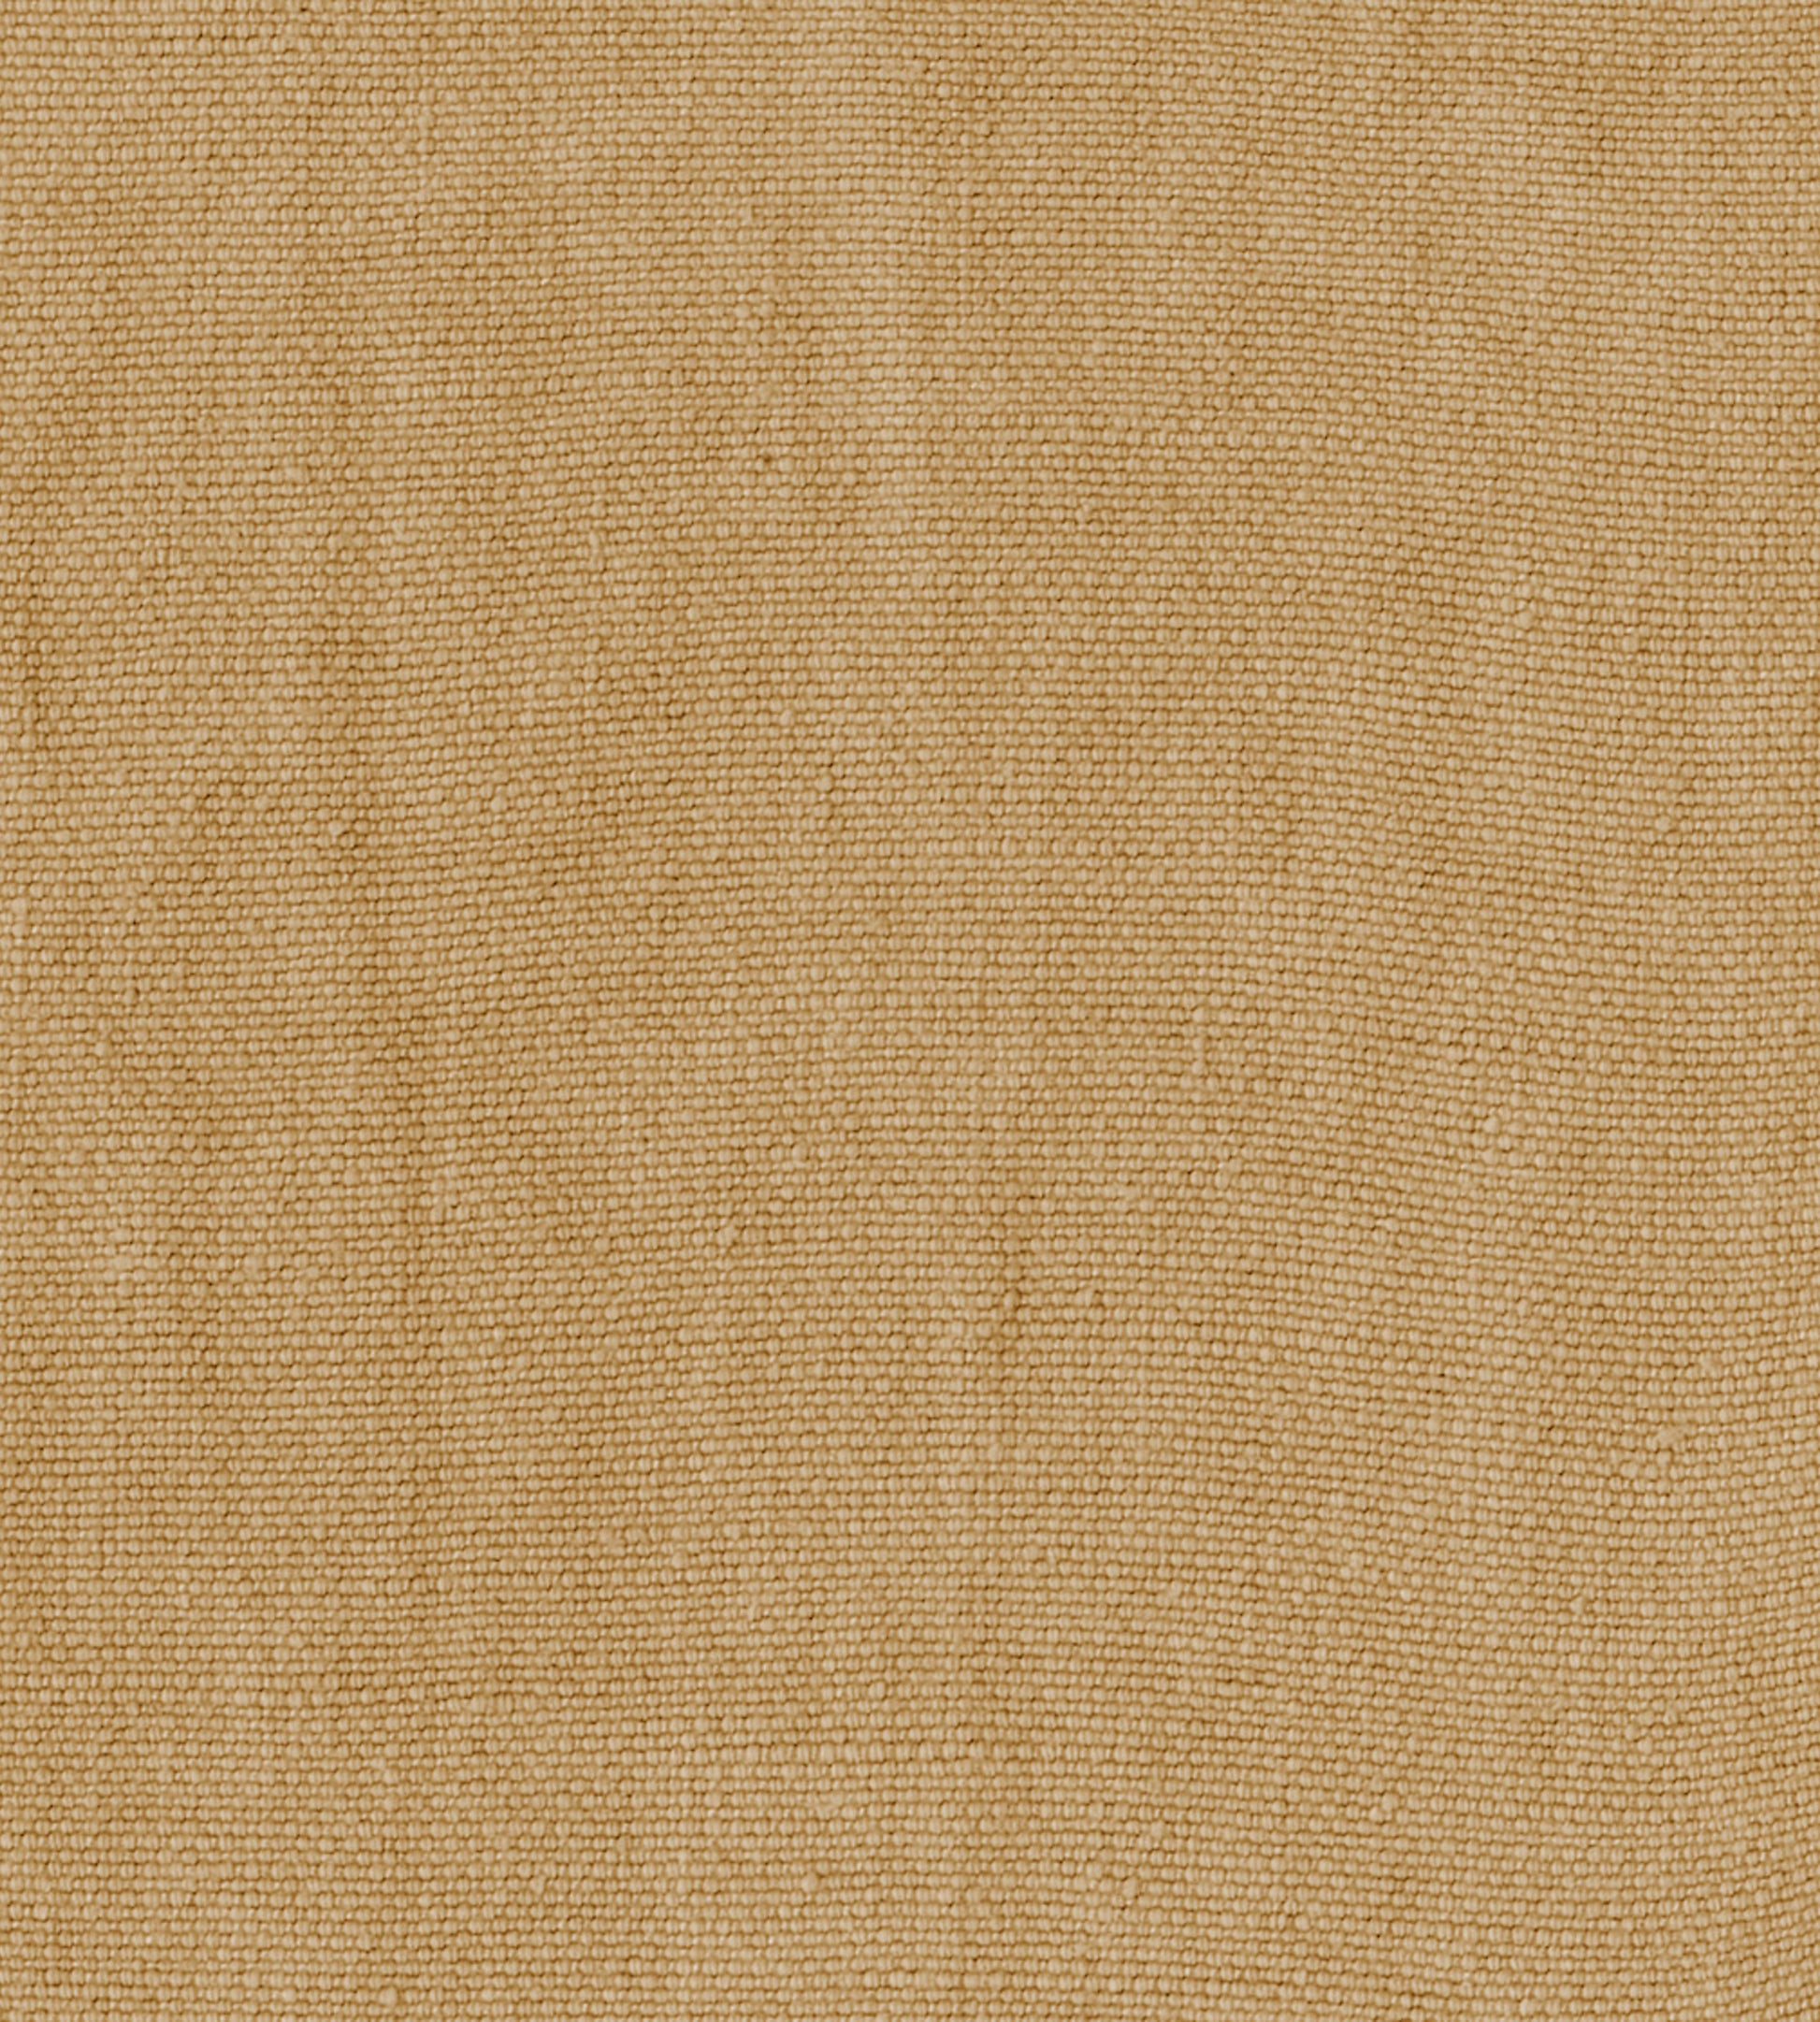 Purchase Alhambra Fabric Item B8 0038CANL, Candela Suede 1